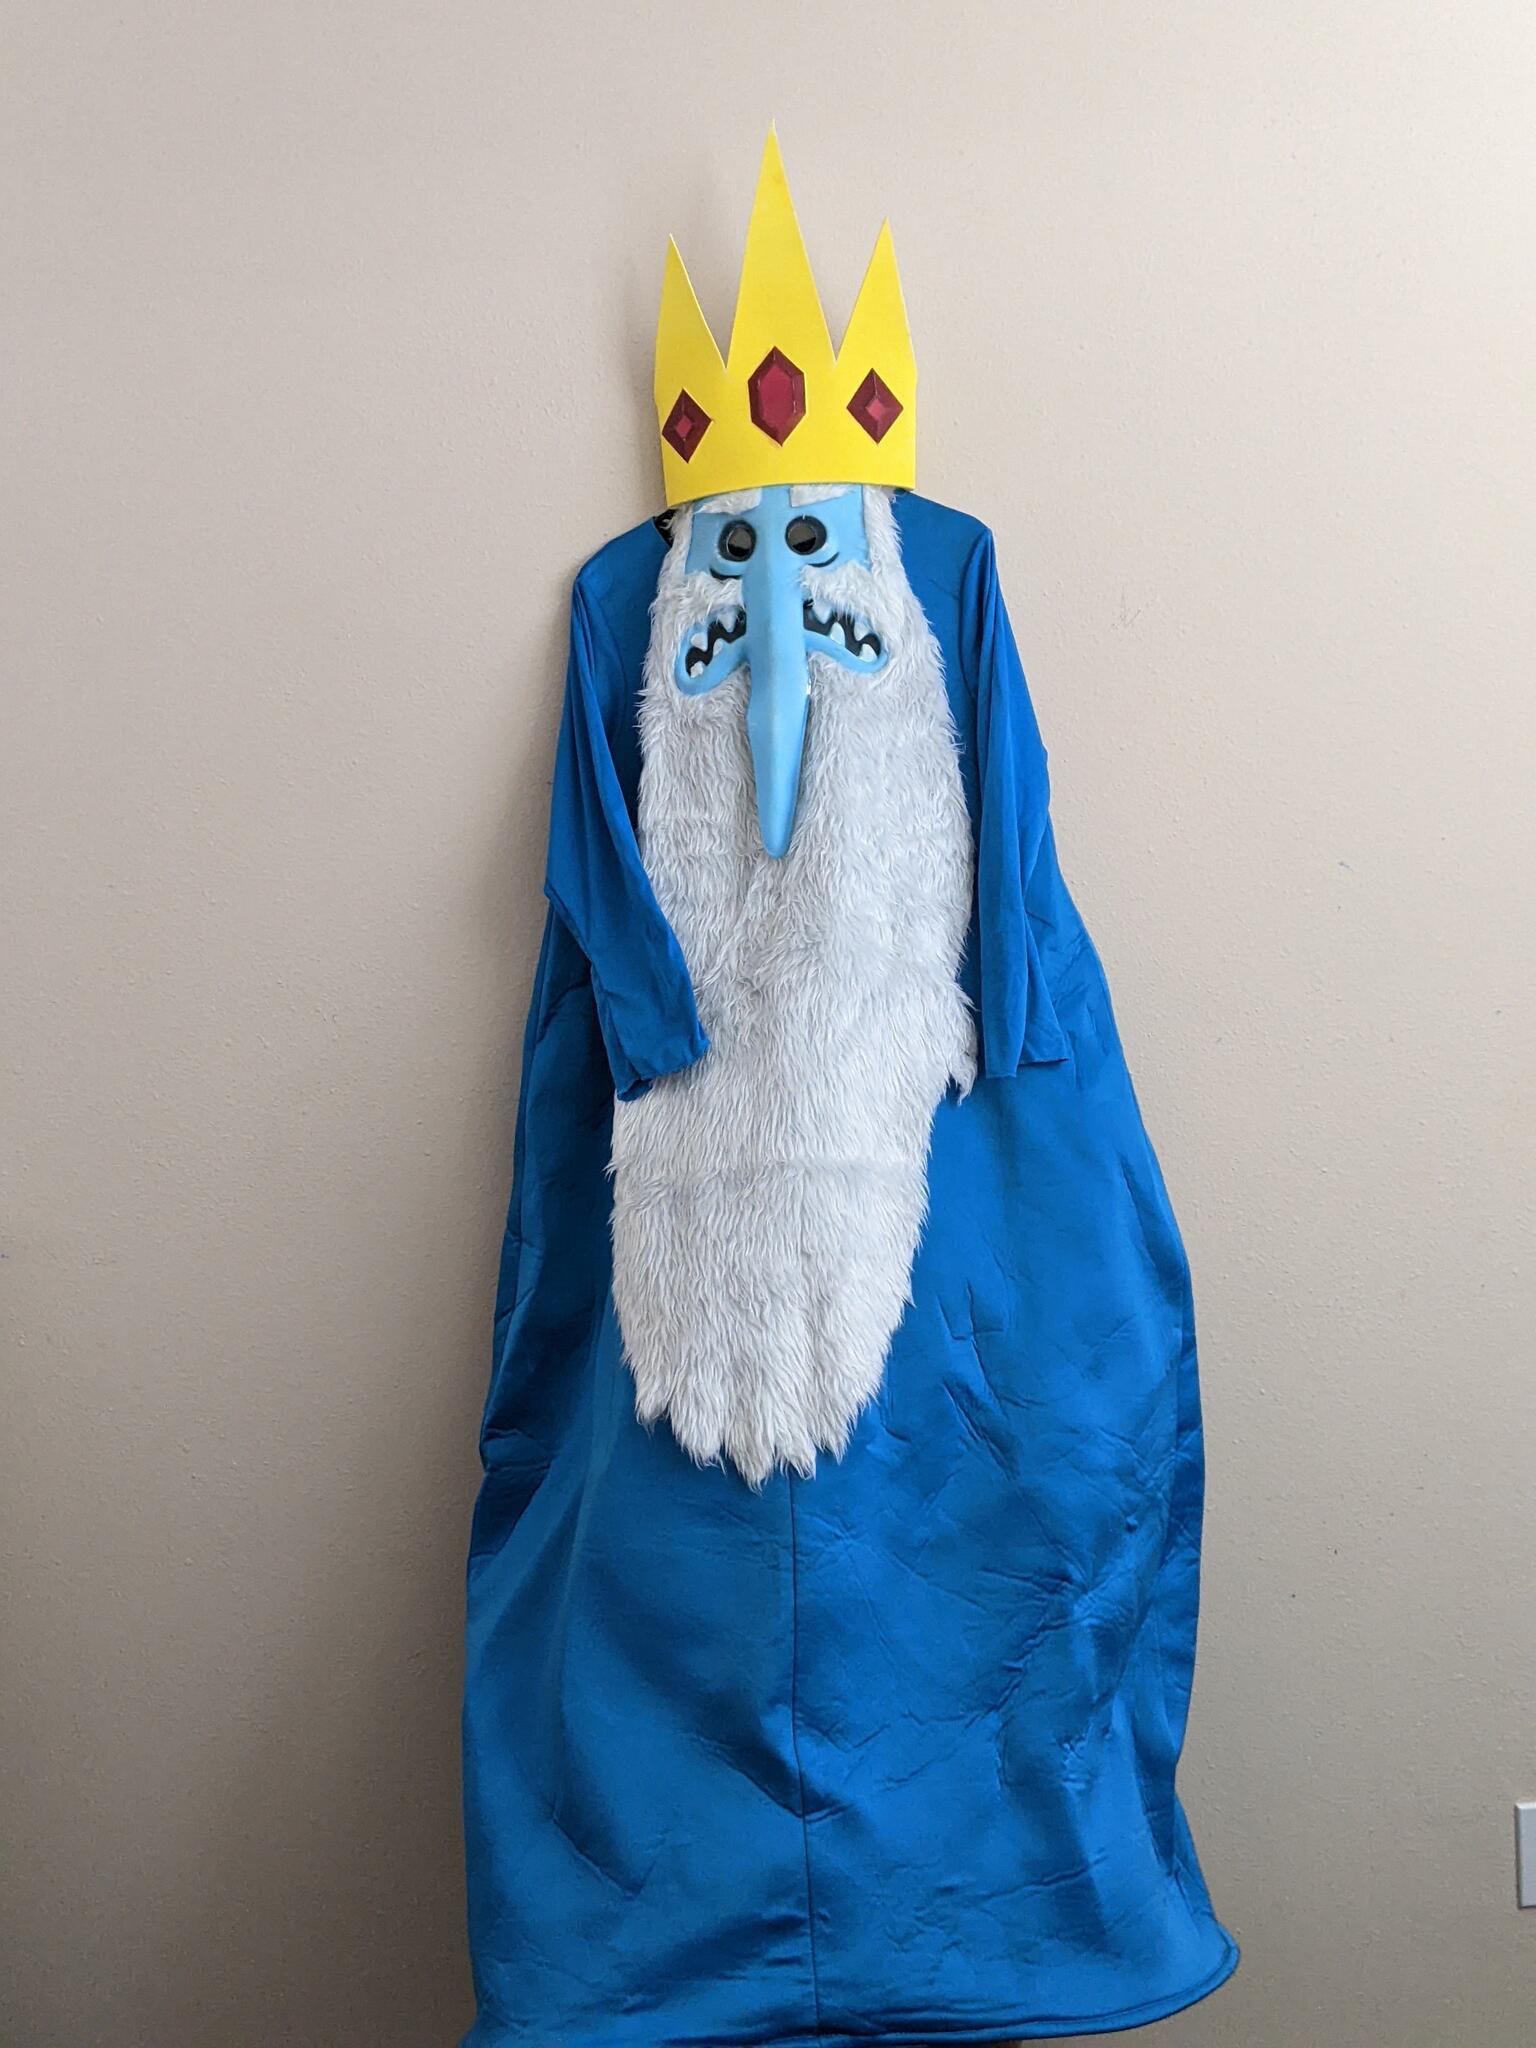 Adult Size- Spirit Halloween- Ice King Costume for $30 in Wesley